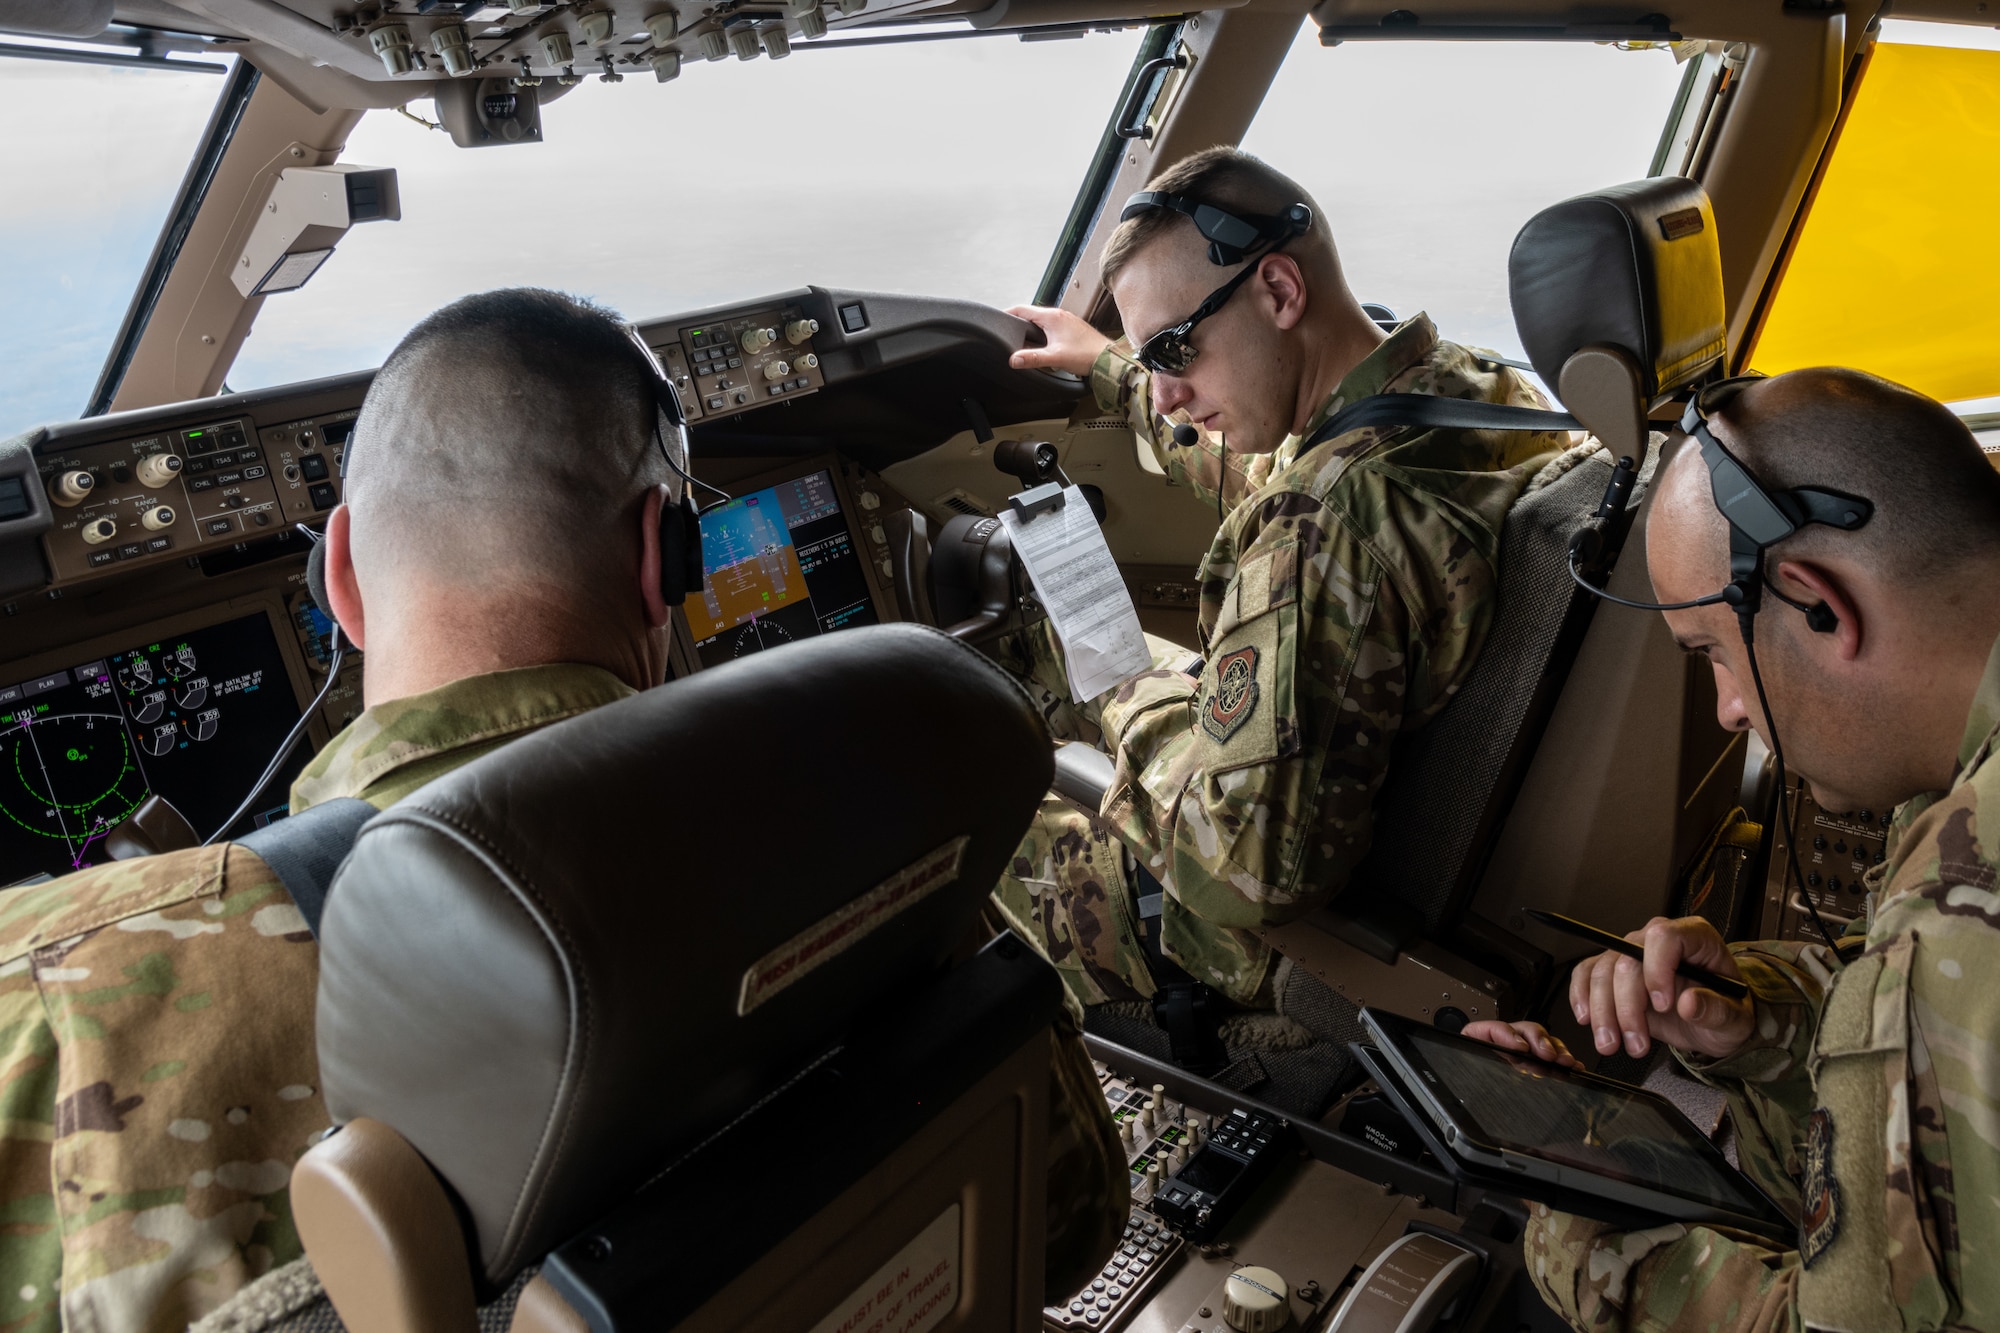 (From left) Lt. Col. Joshua Moores, 344th Air Refueling Squadron commander, 1st Lt. Brandon Sweet, 344th ARS KC-46A Pegasus pilot, and Senior Master Sgt. Lindsay Moon, 22nd Operations Group senior enlisted manager, review drogue procedures in preparation to refuel F/A-18 Hornets from Marine Fighter Attack Squadron 112, Fort Worth, Texas, Aug. 11, 2021.